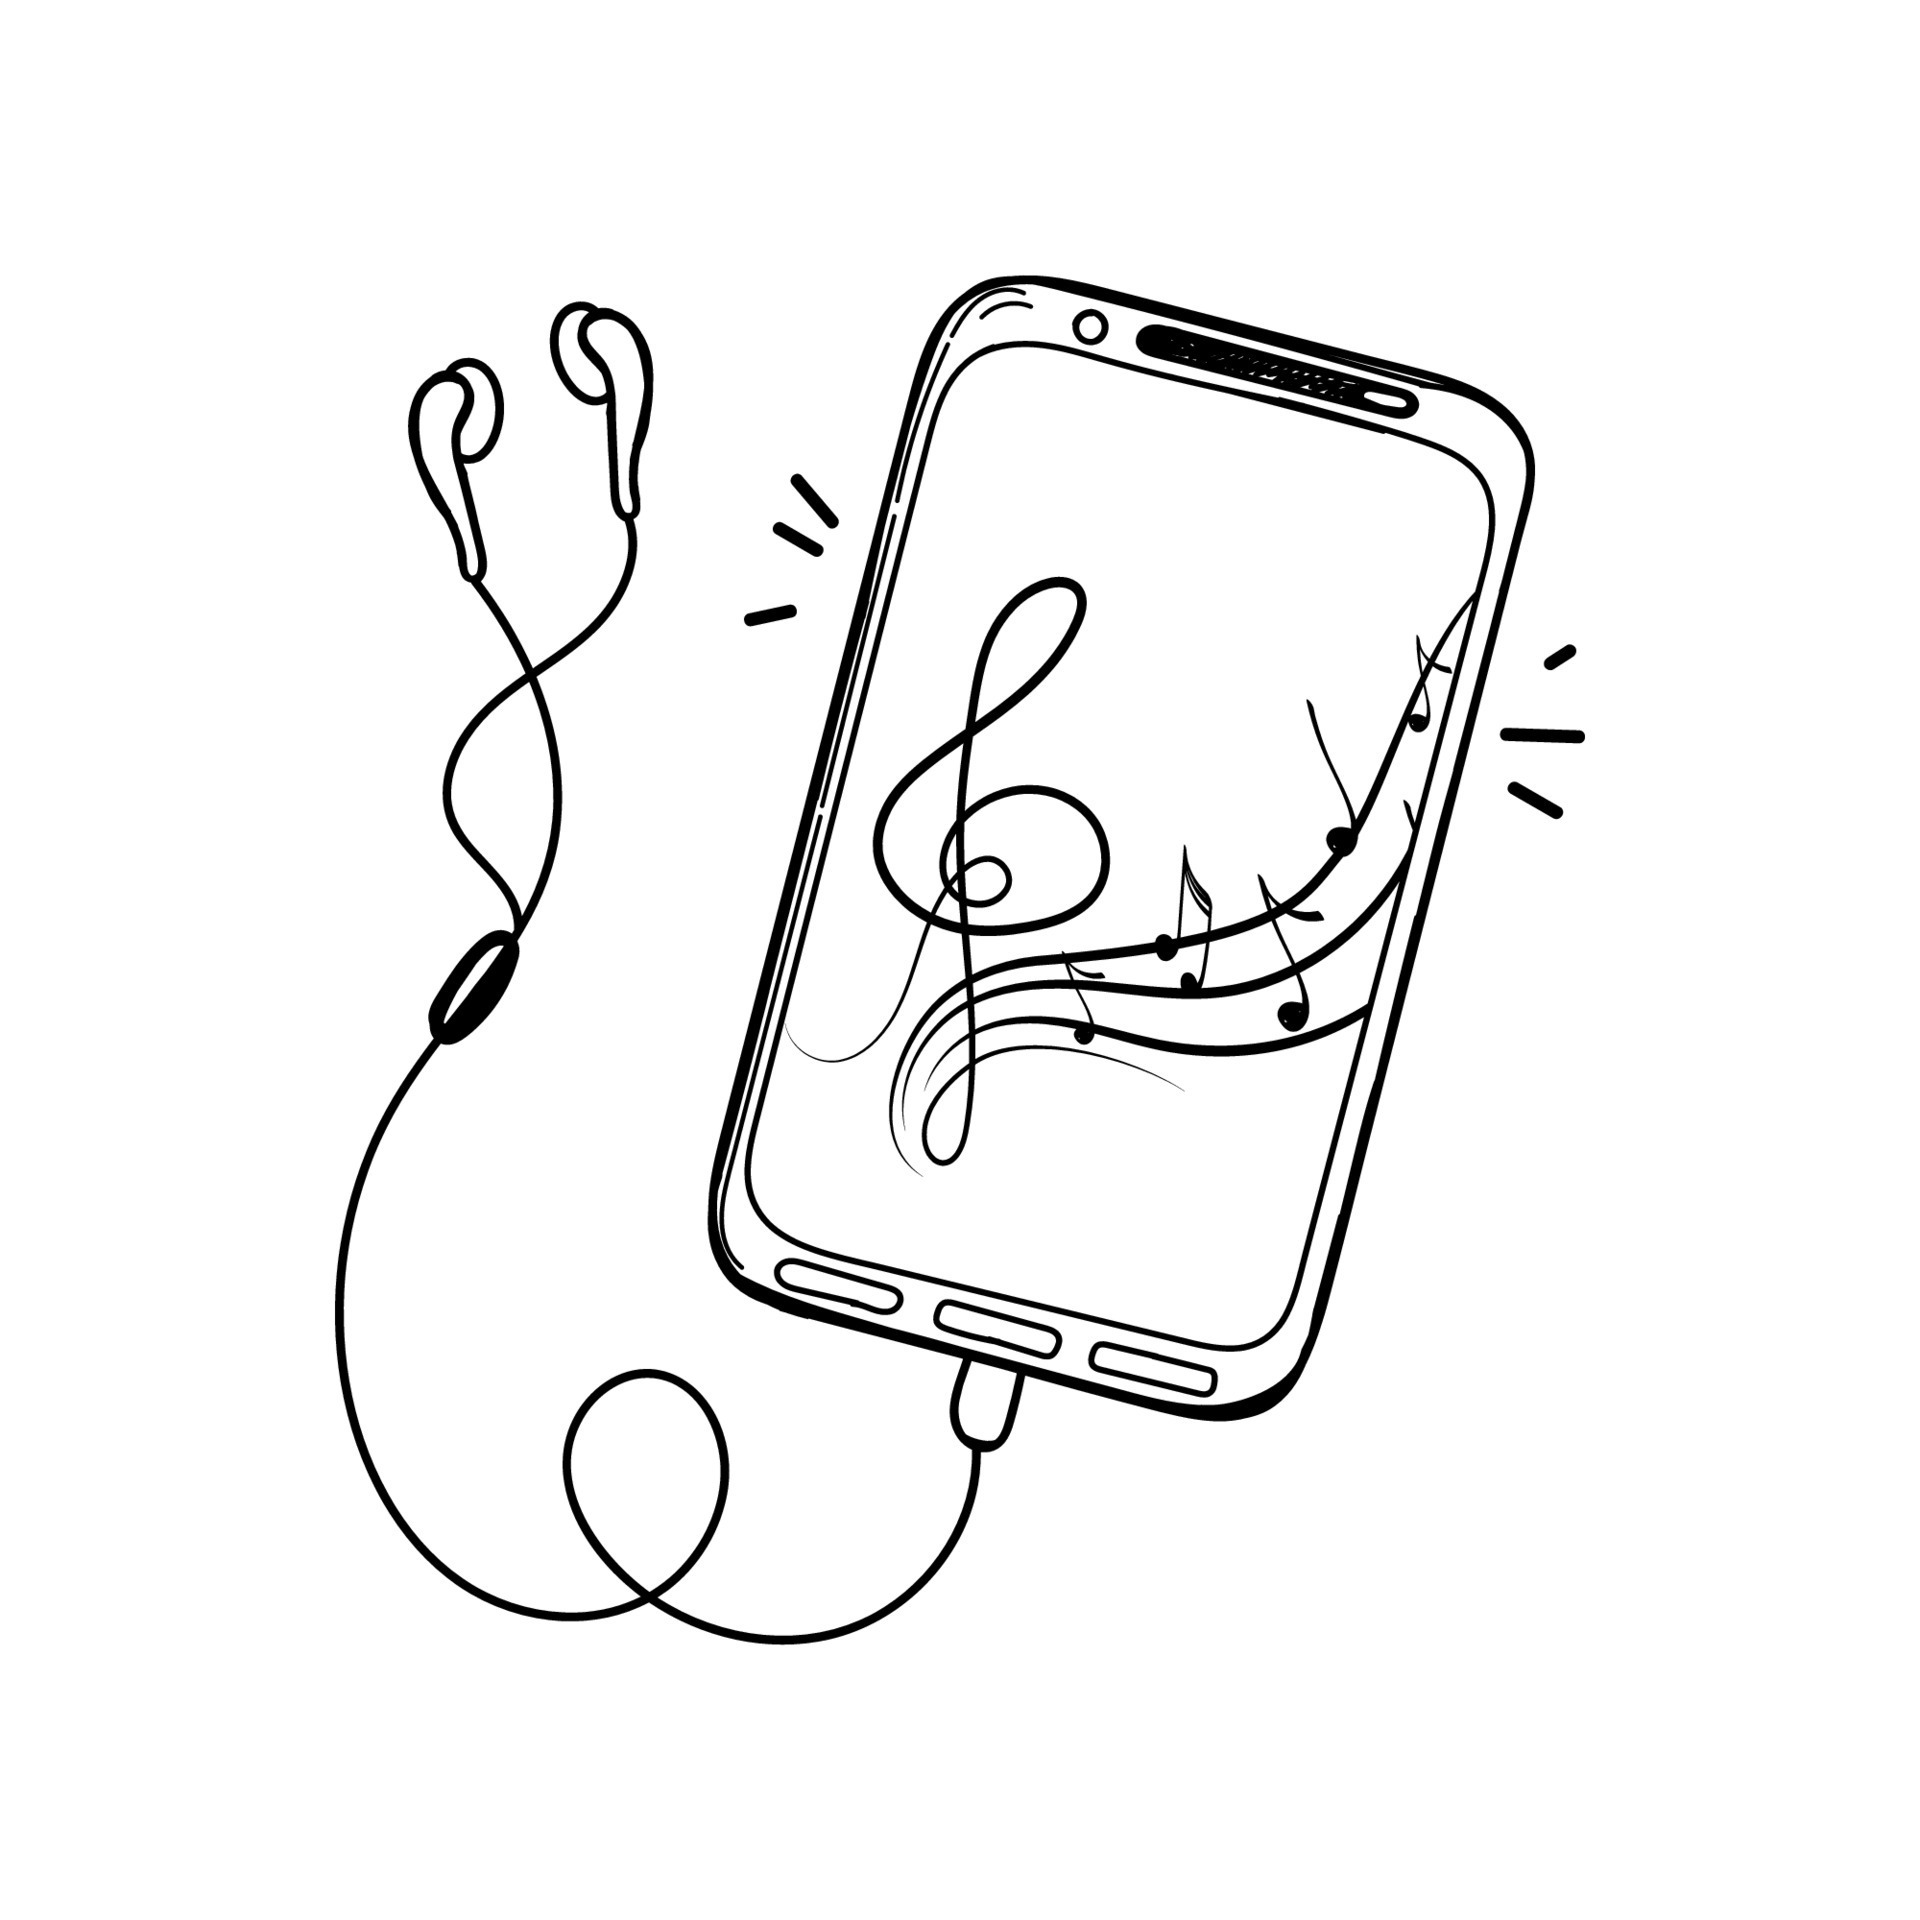 Simple hand draw sketch 3 old model flat color shining vector smartphone  Hand draw sketch 3 old model flat color shining  CanStock